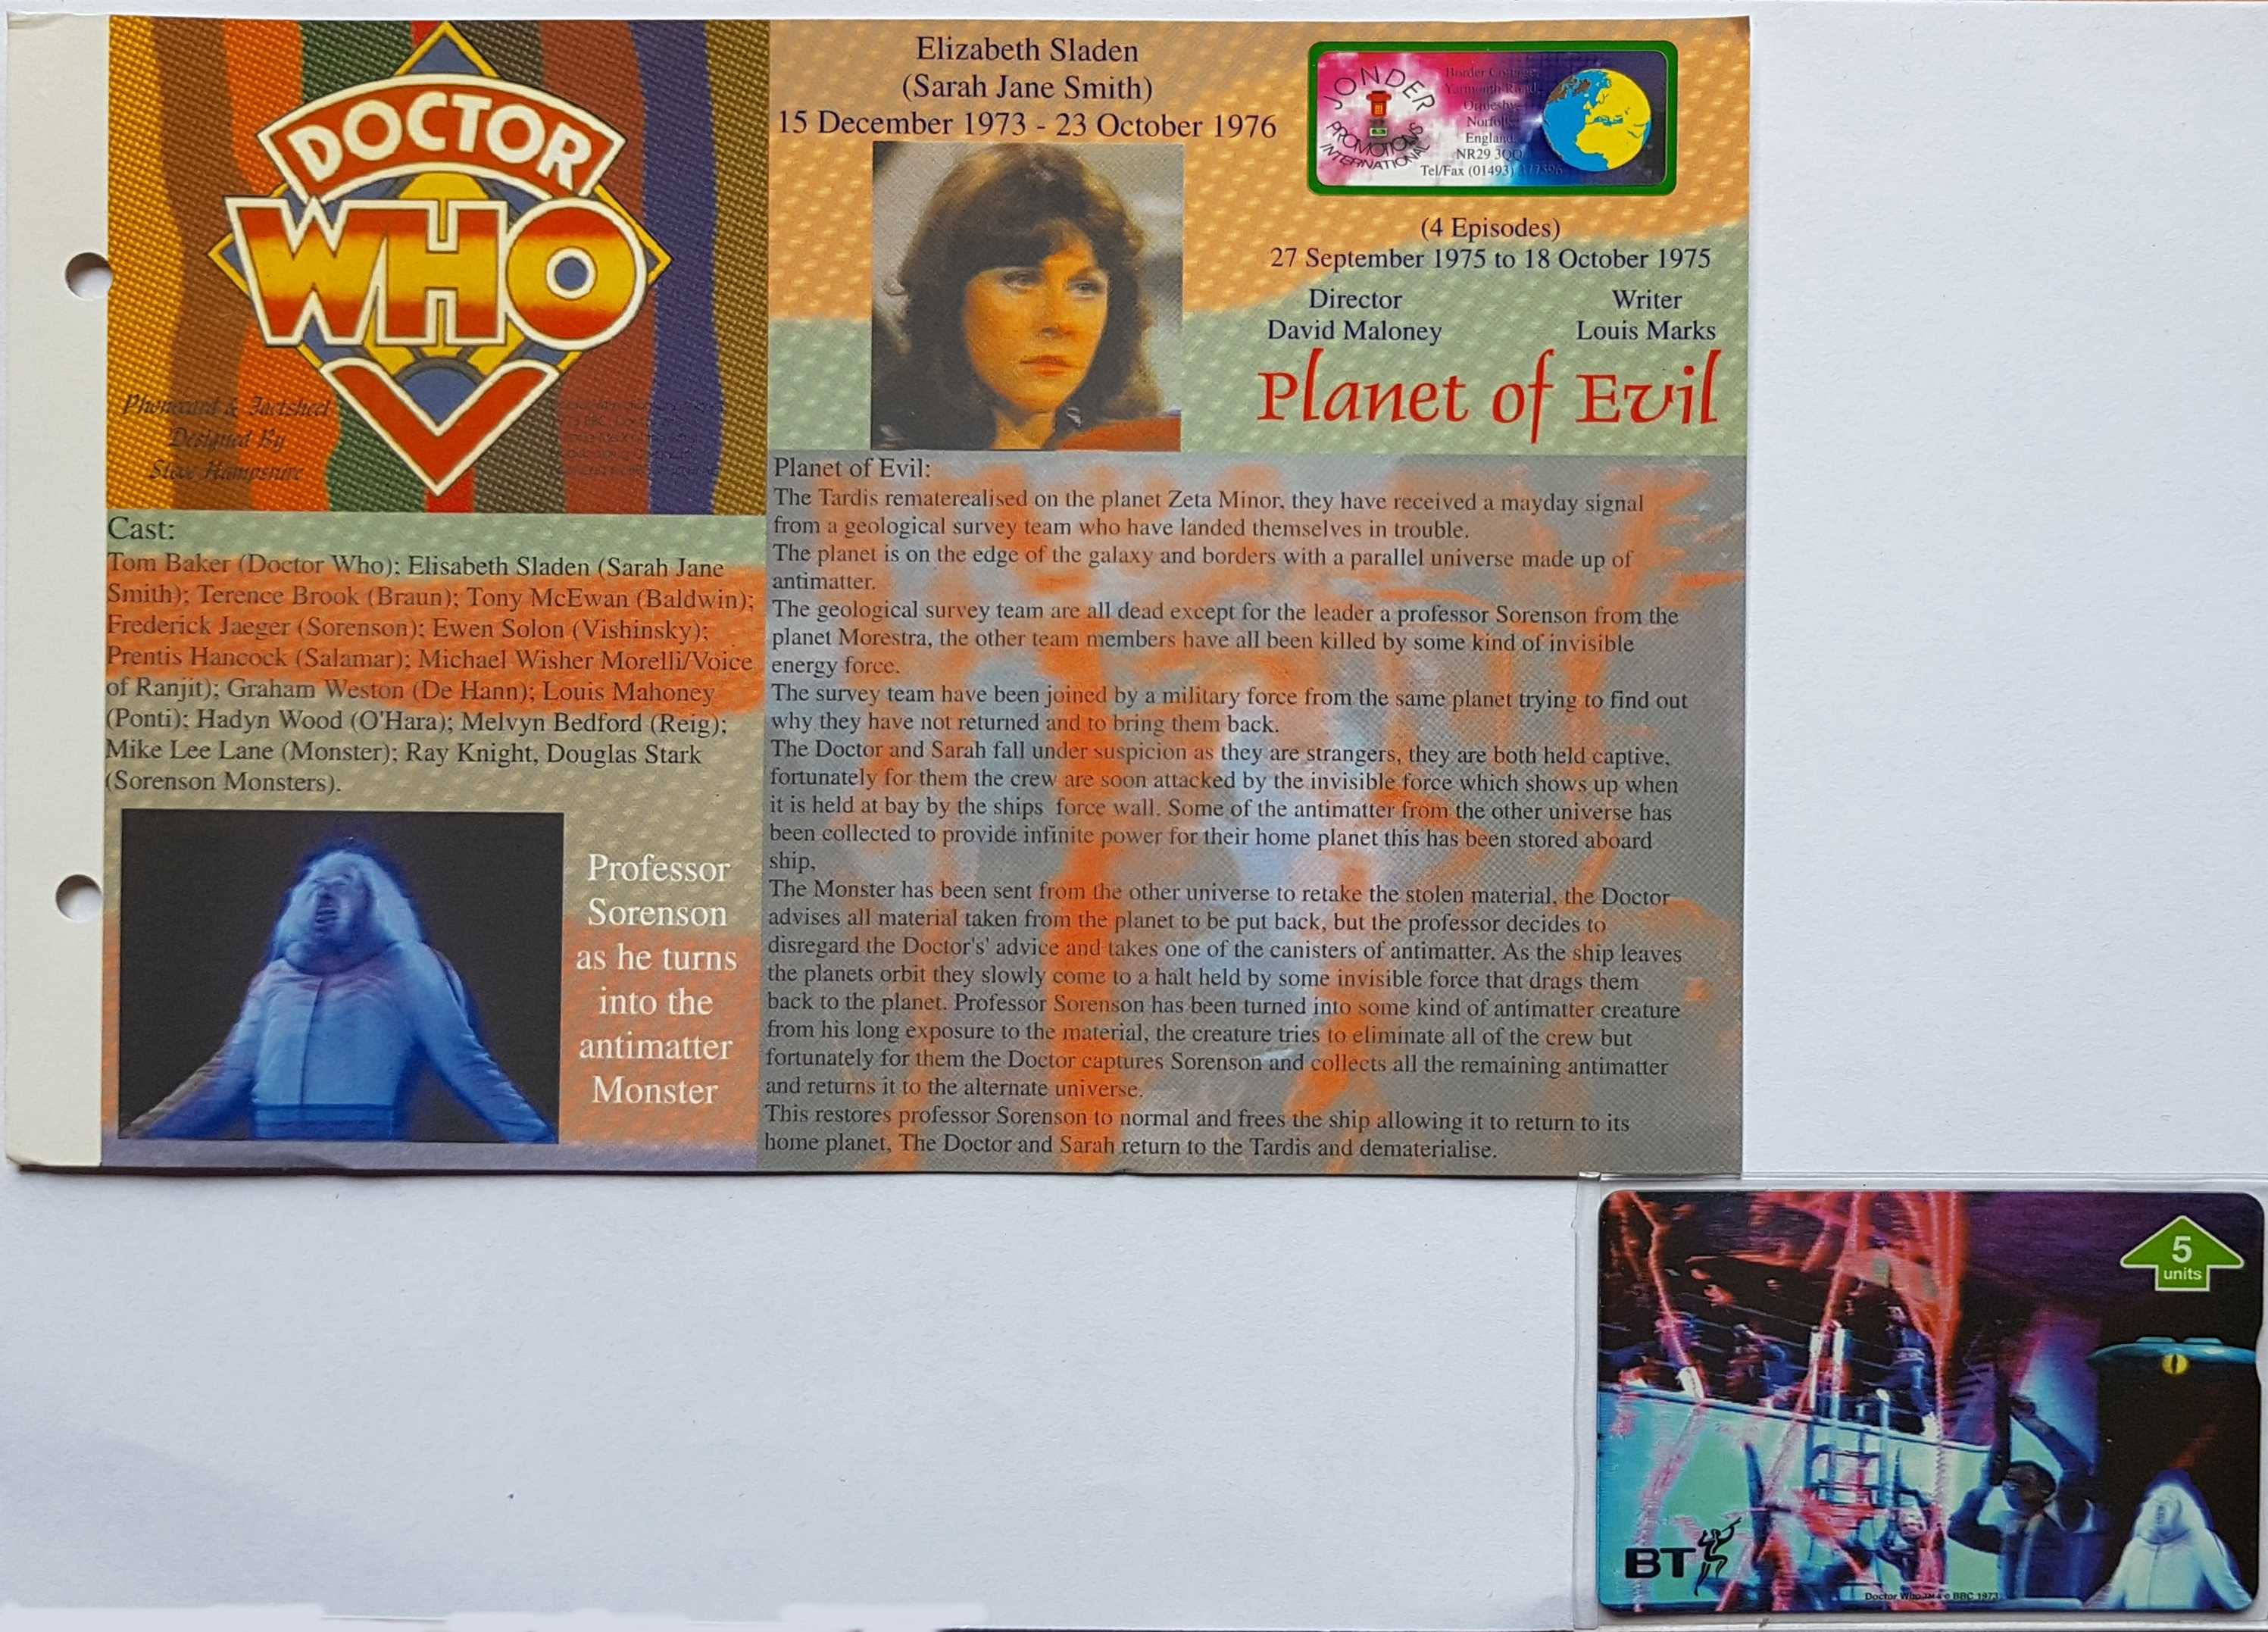 Picture of PC-BTG699 Doctor Who - Planet of evil - Phone card by artist  from the BBC records and Tapes library